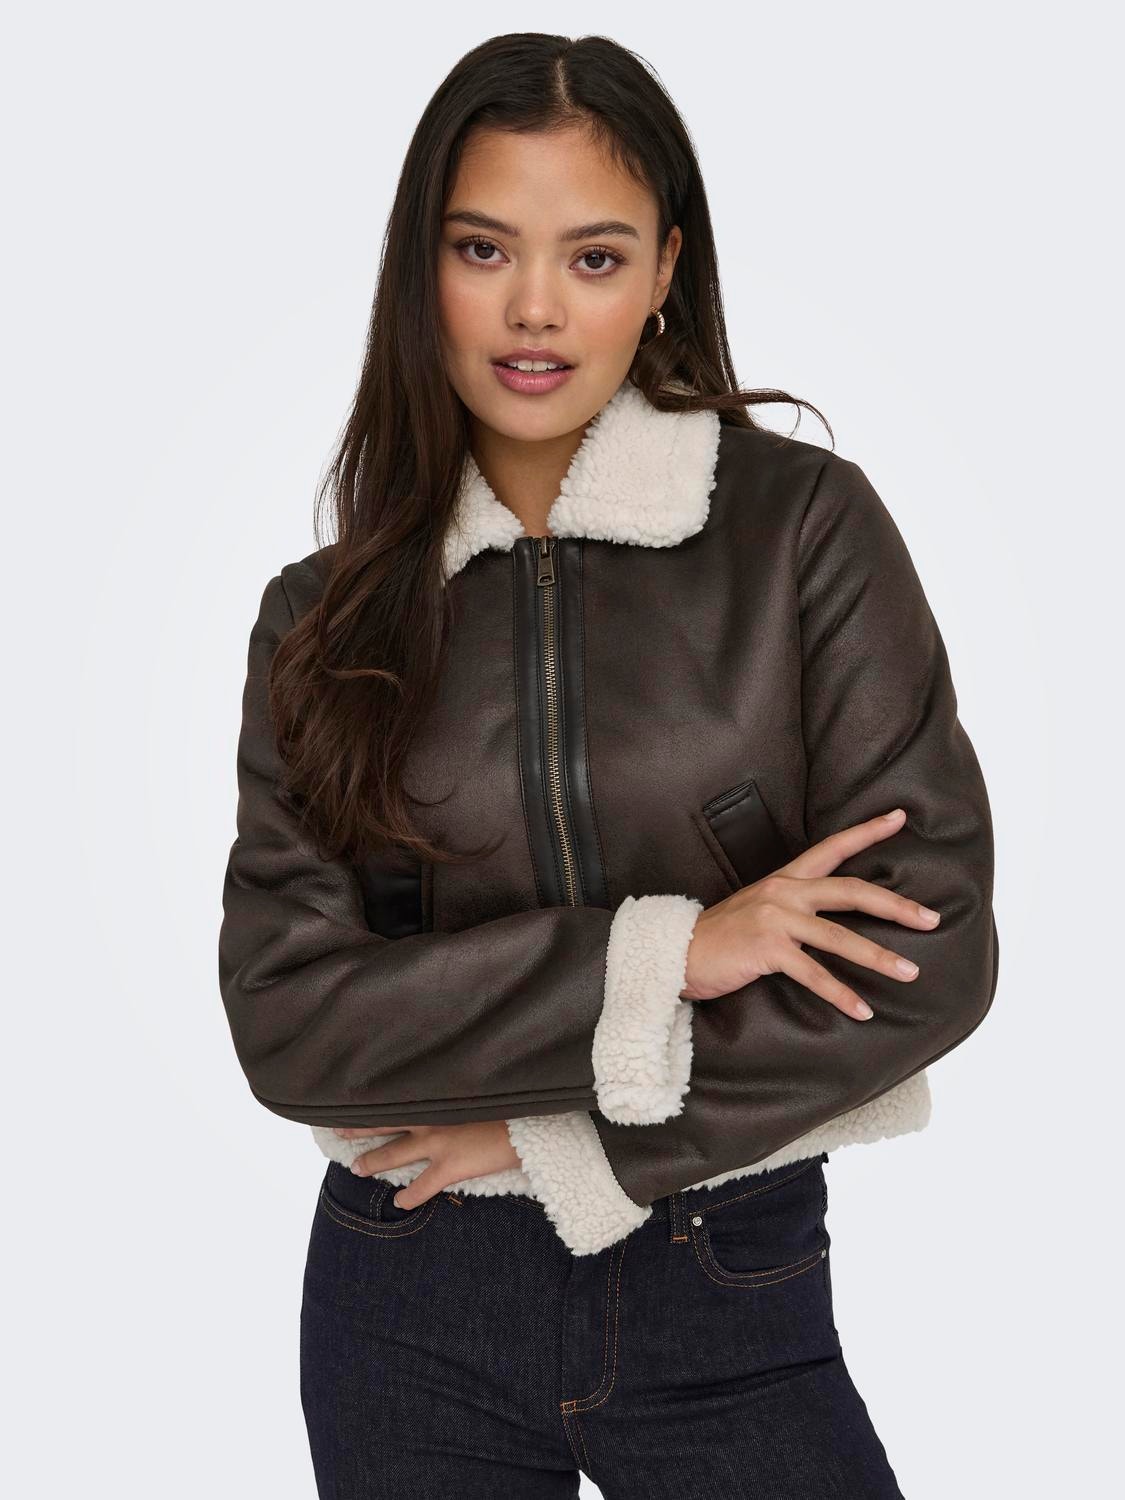 ONLY Faux leather jacket -Mole - 15324138